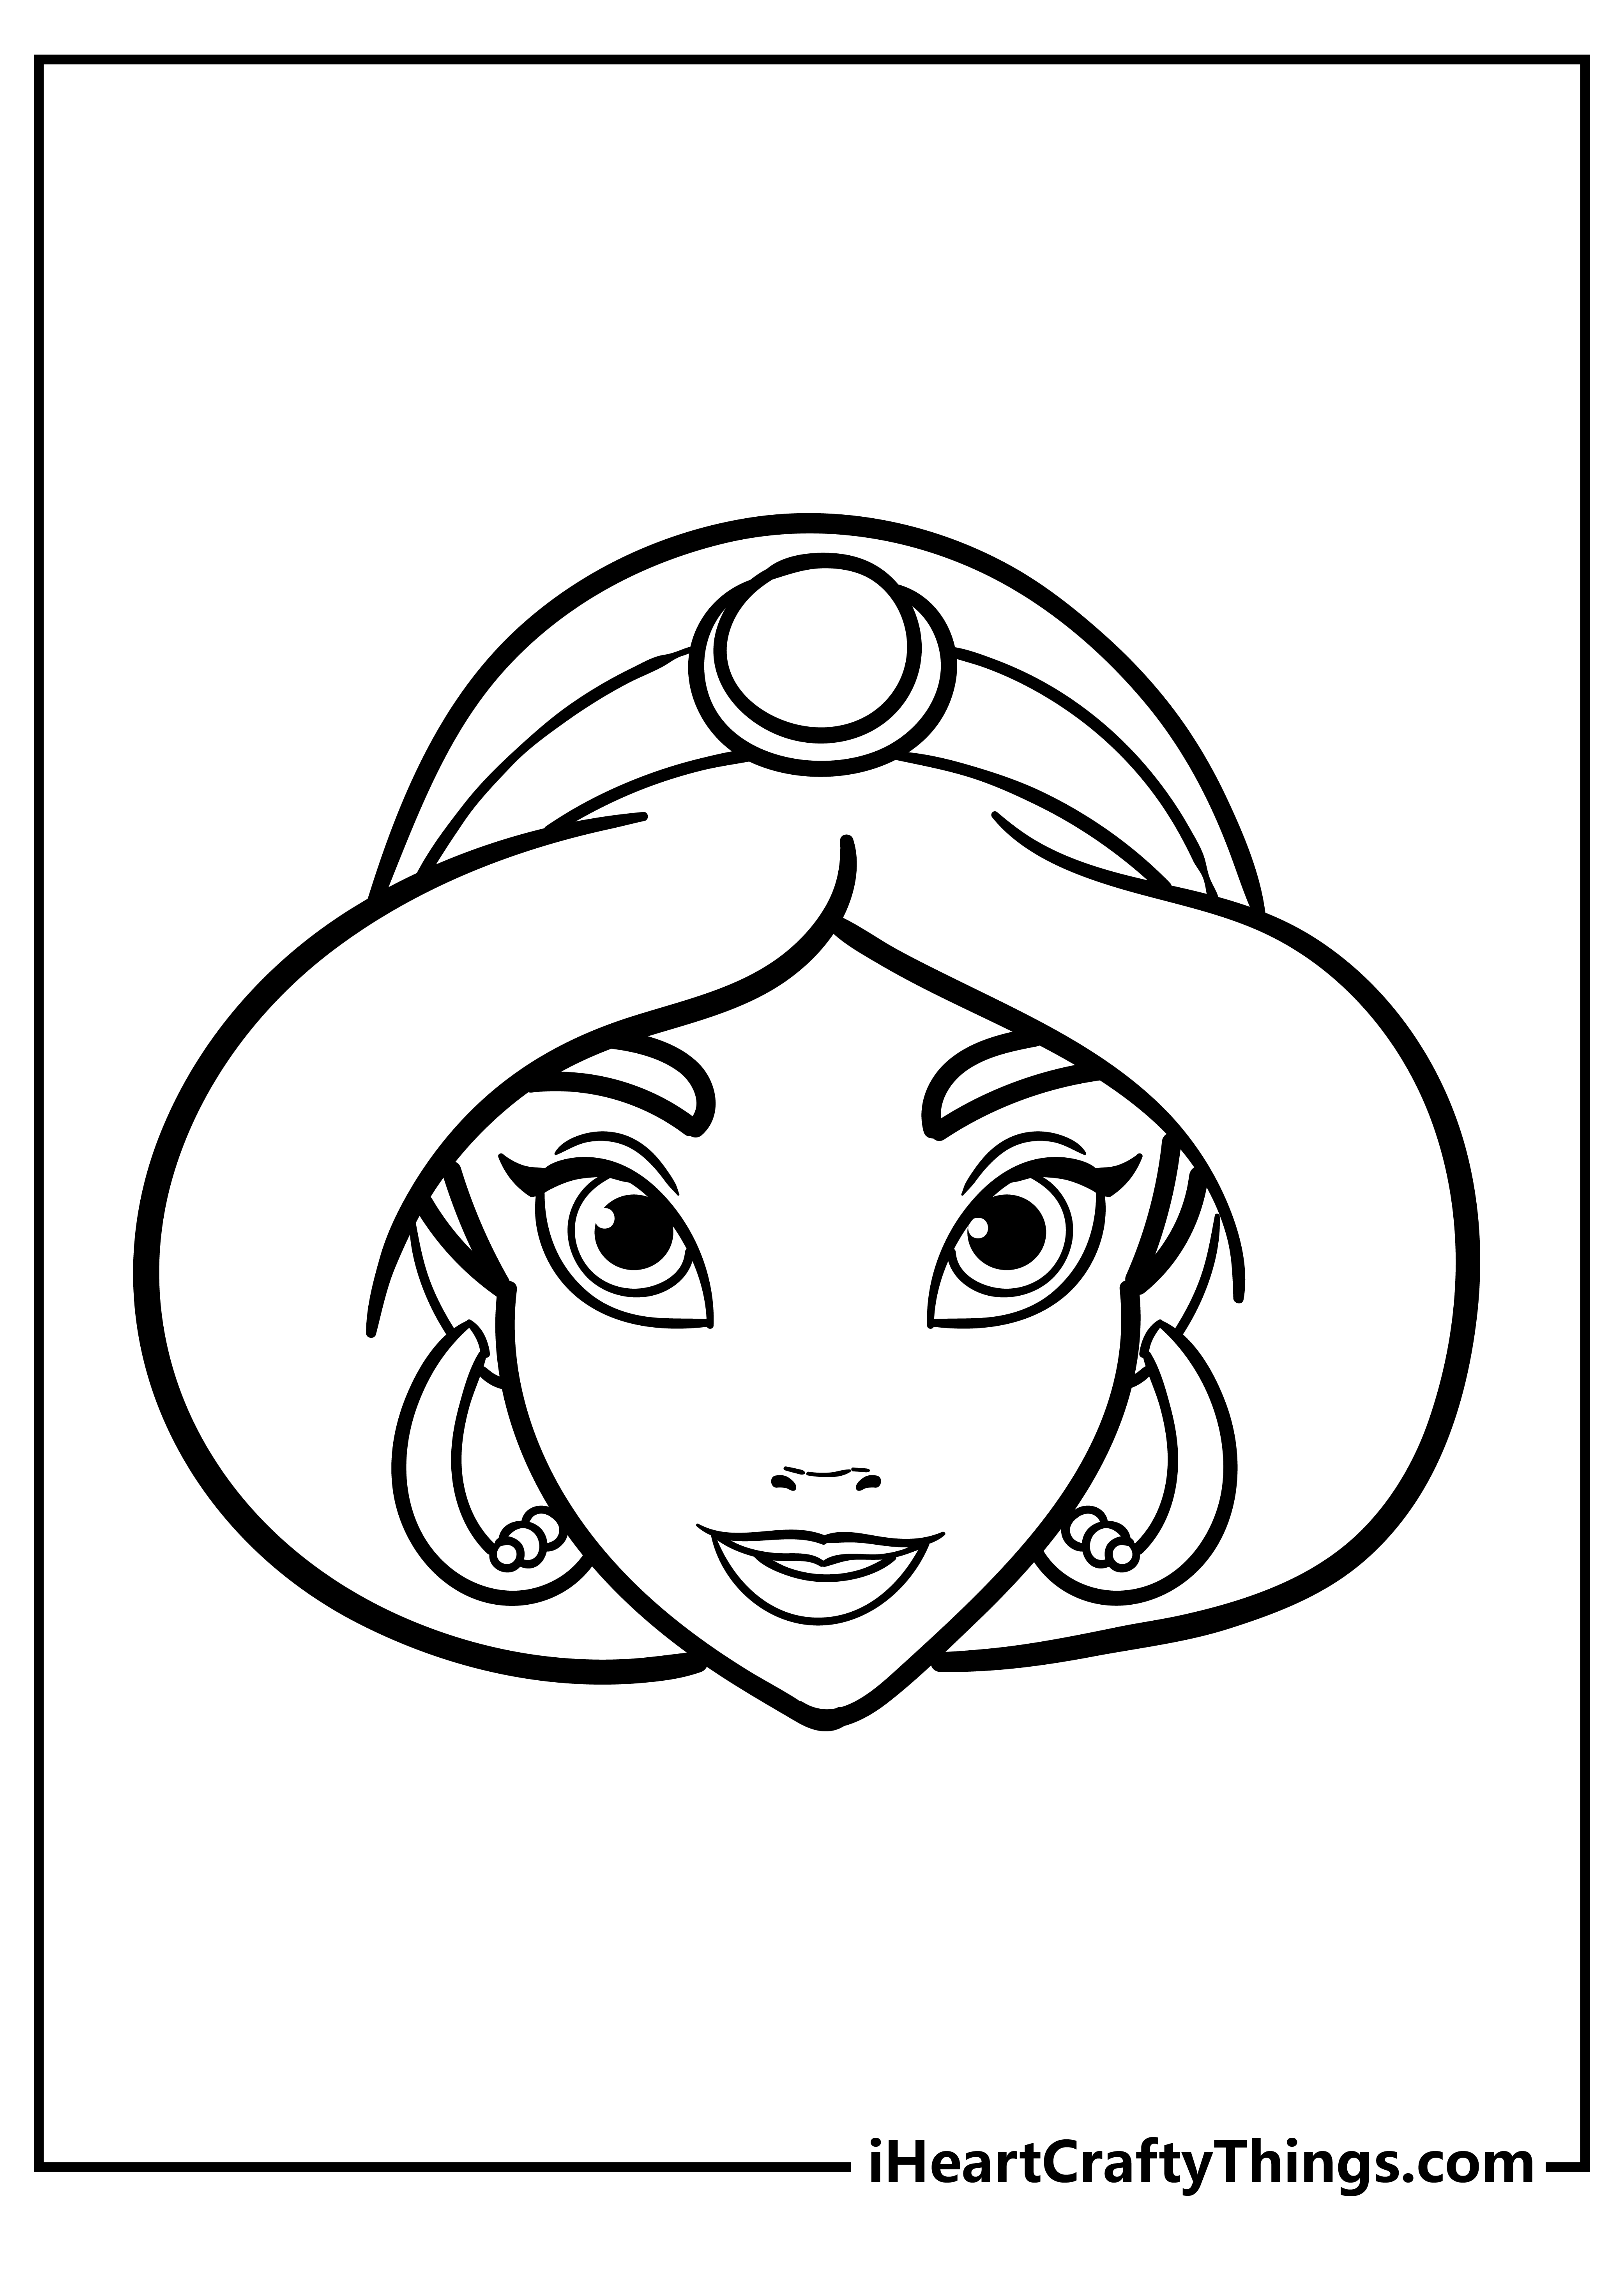 Jasmine Coloring Pages for kids free download